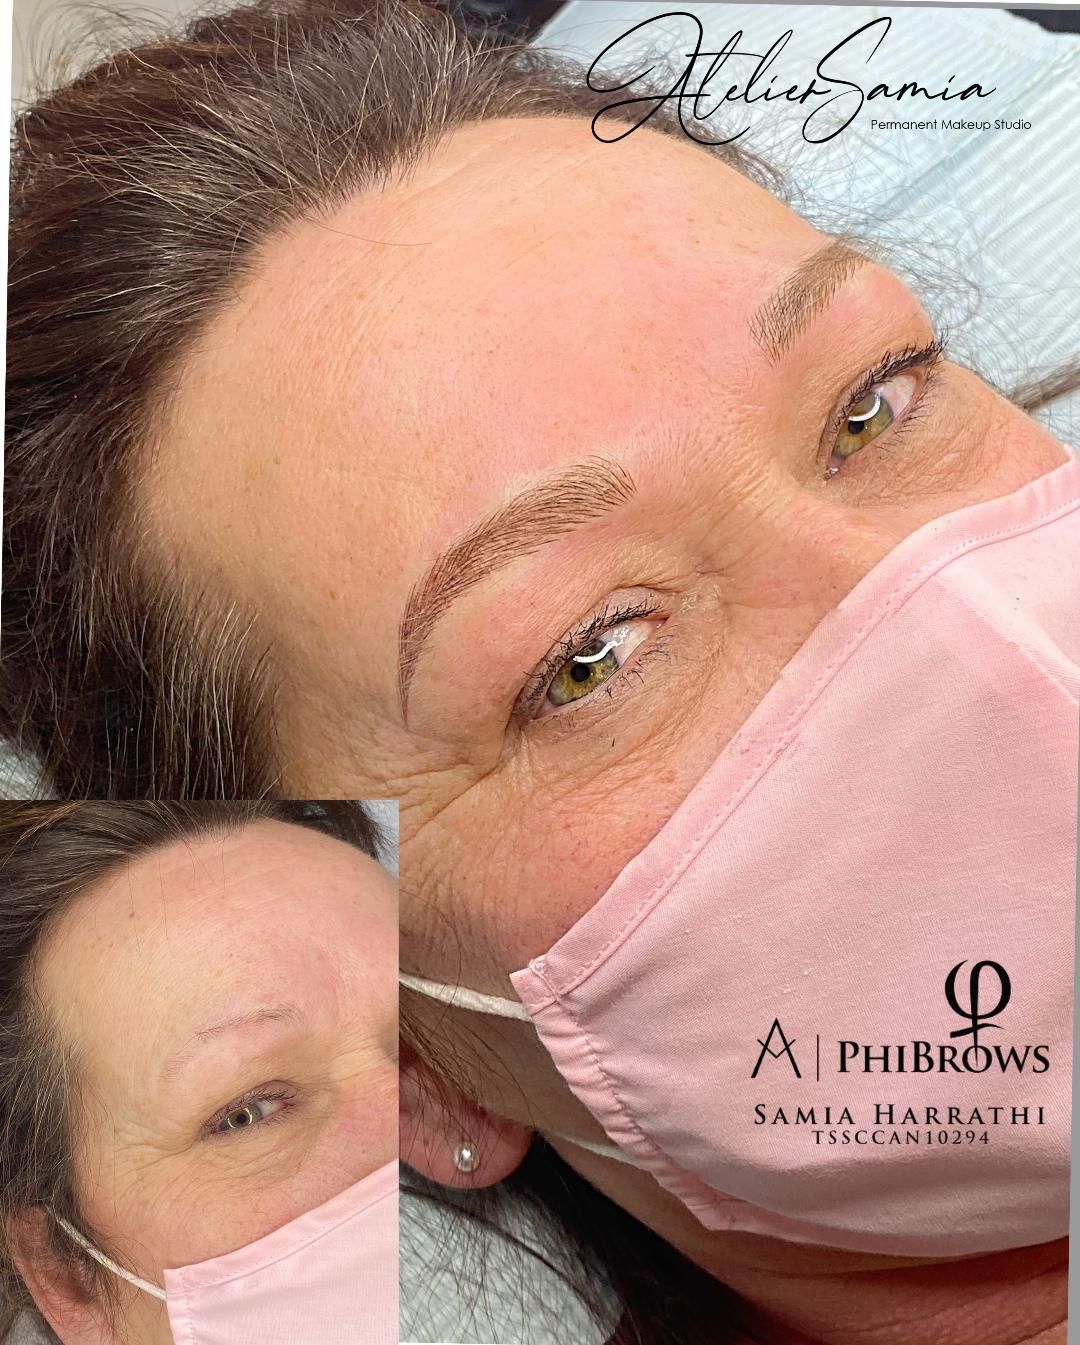 Image of a client before and after permanent makeup